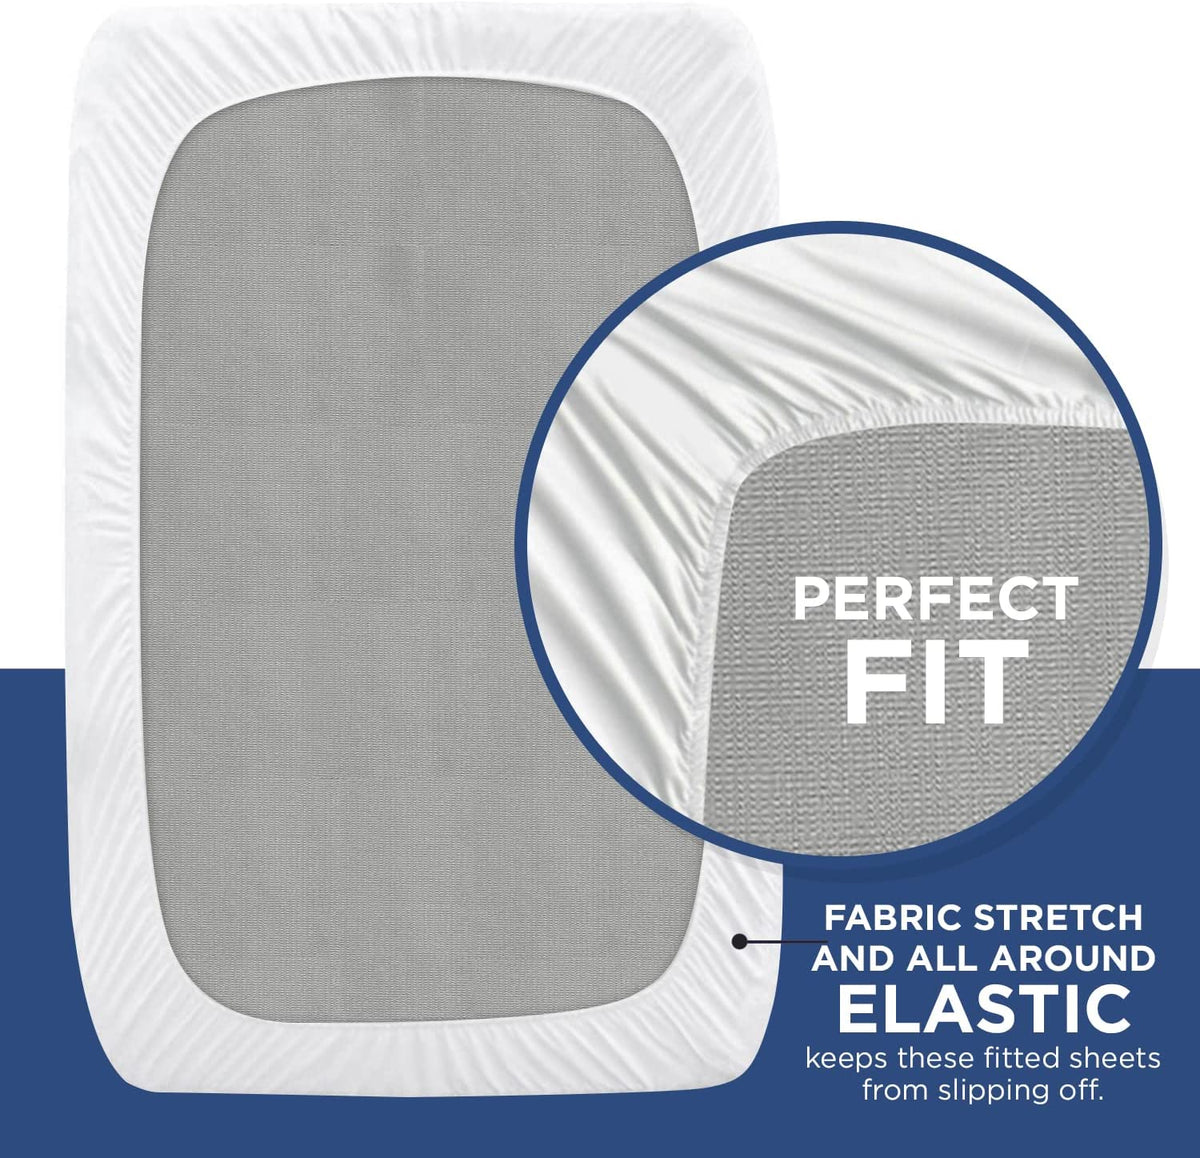 Premium T-130 Fitted Sheets